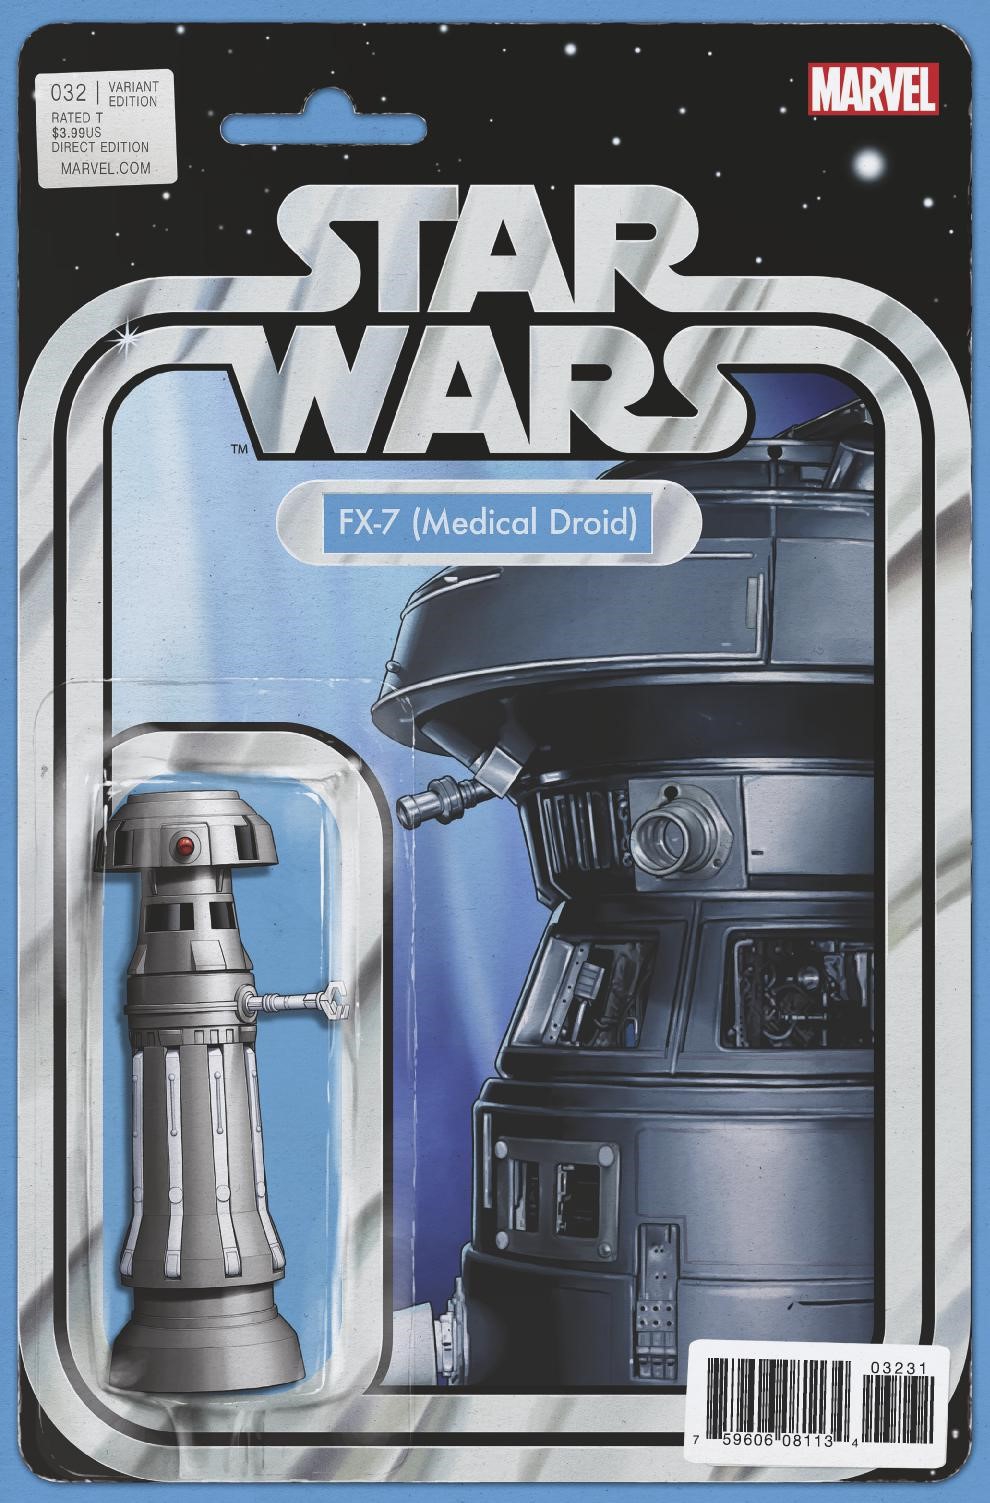 Star Wars #32 (Action Figure Variant Cover) (14.06.2017)